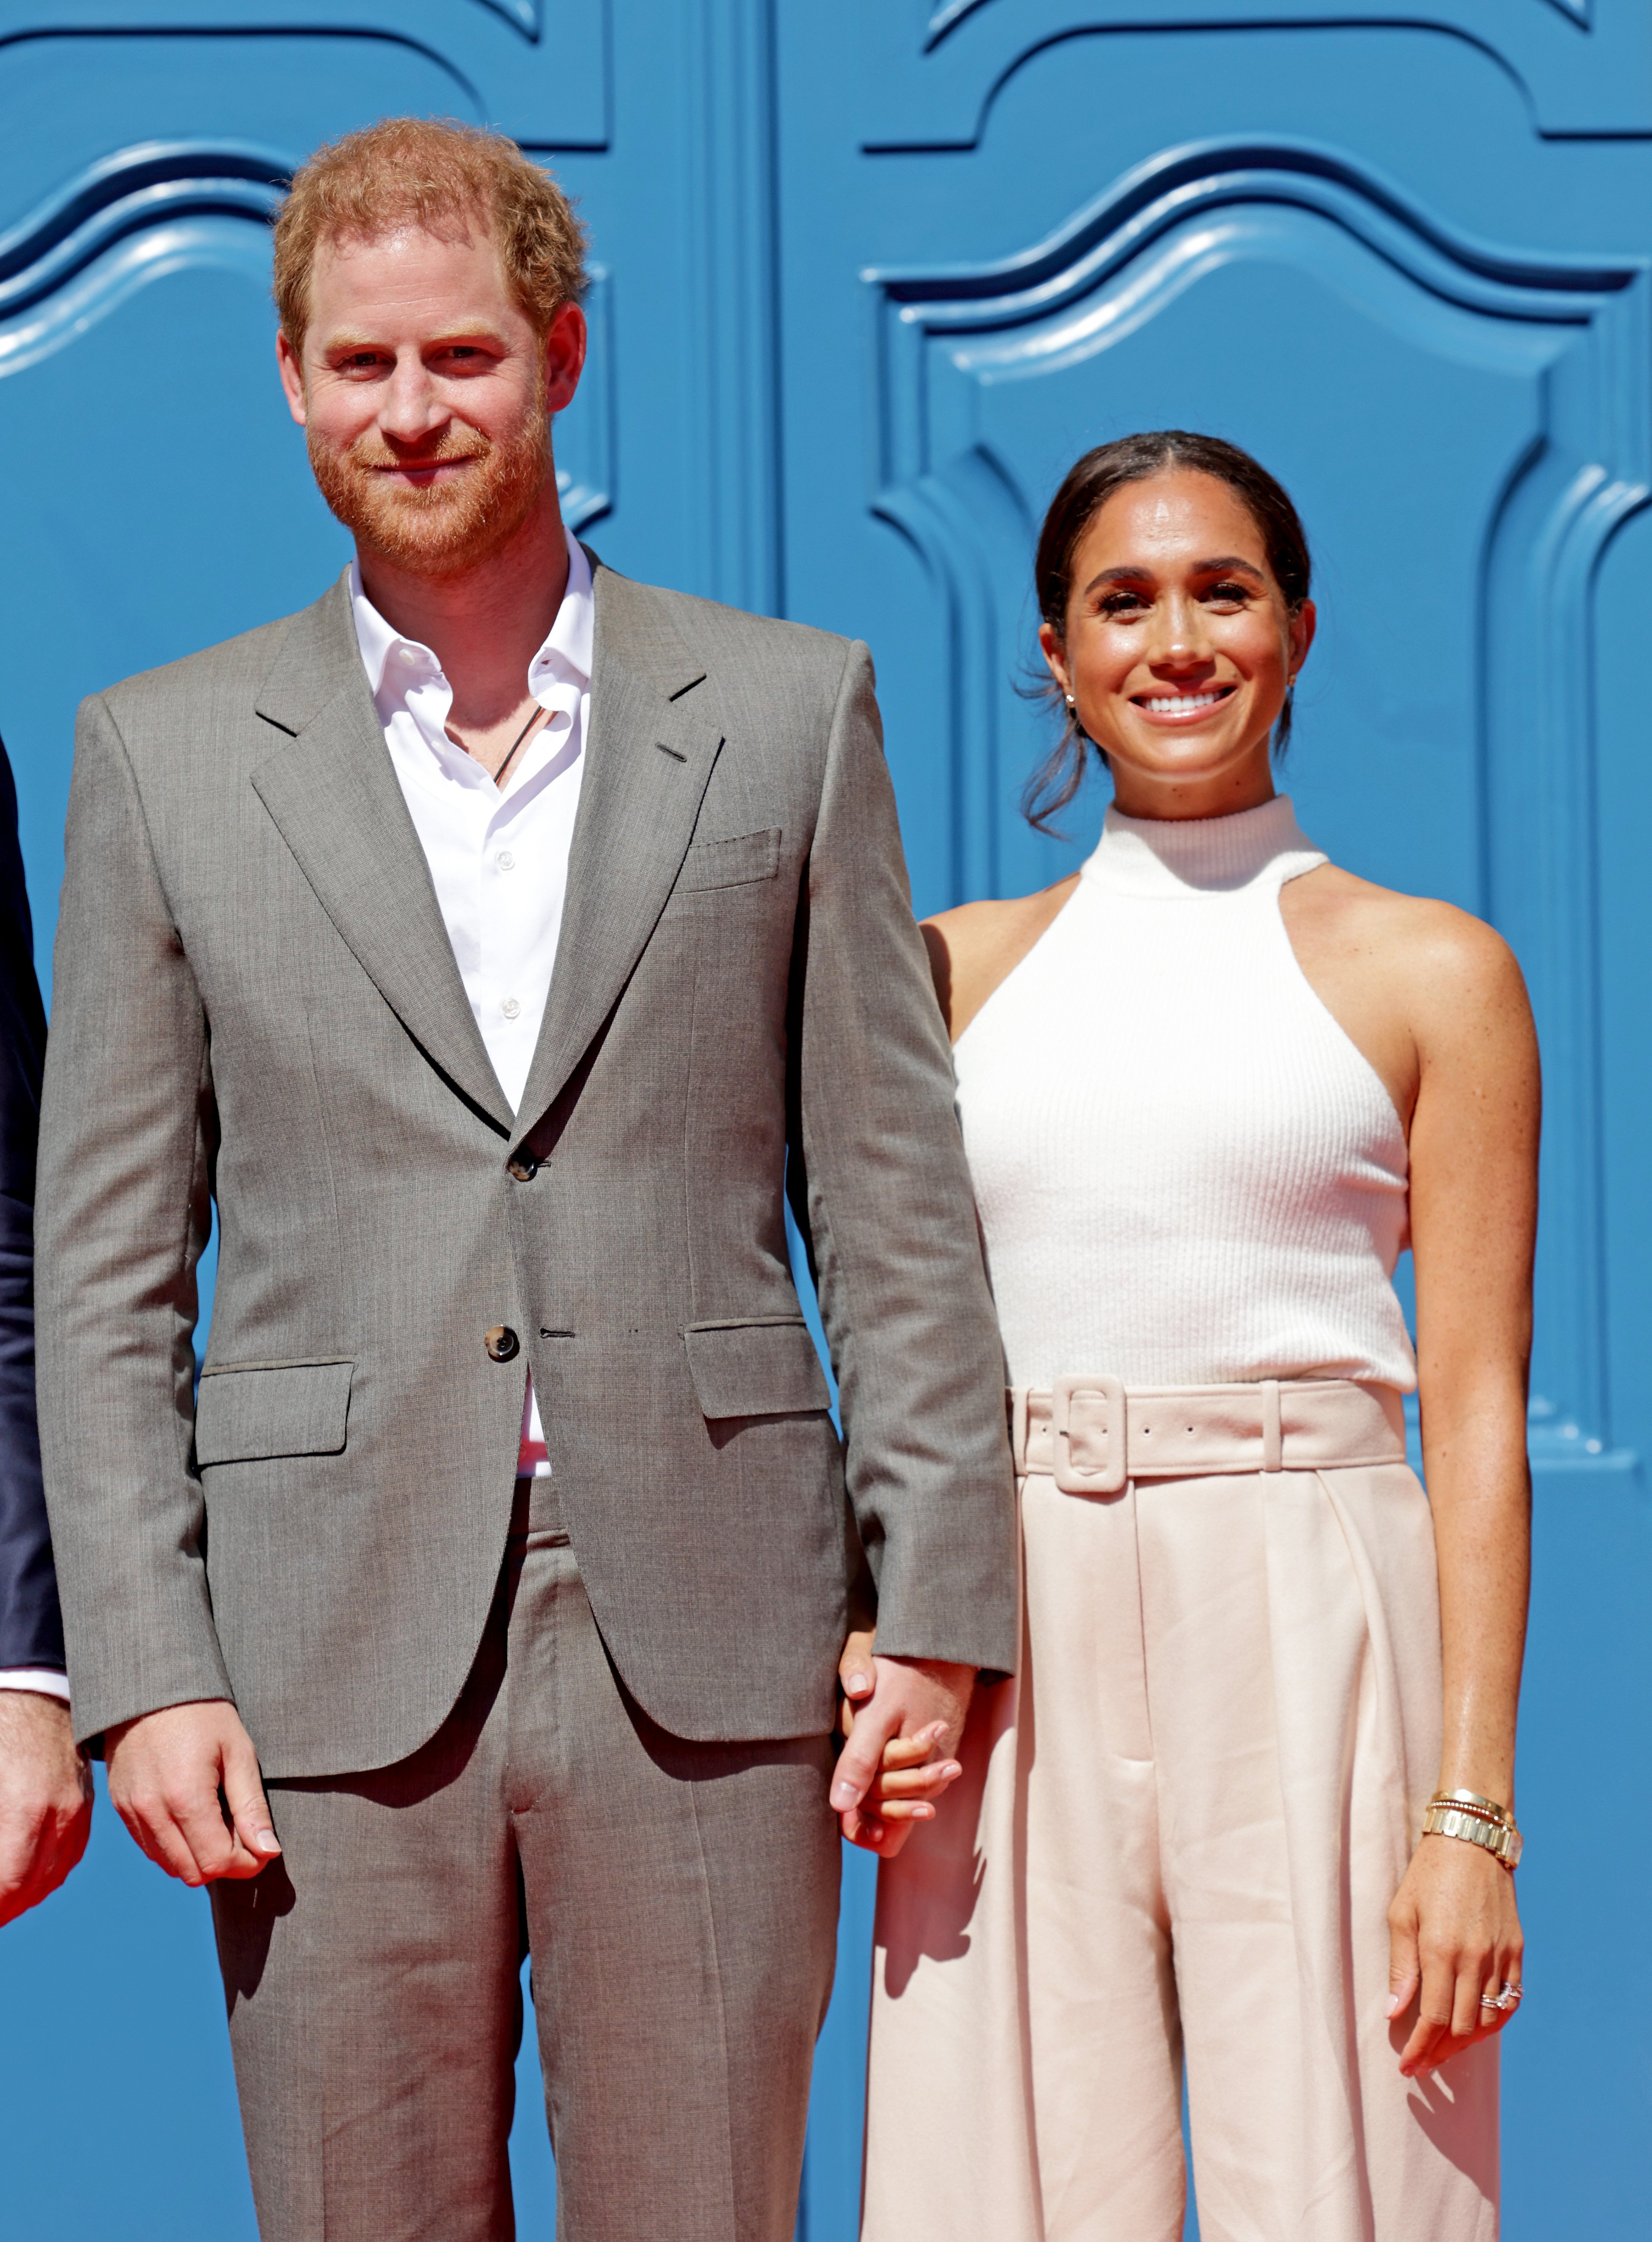 Prince Harry, Duke of Sussex, and Meghan, Duchess of Sussex, arrive at the town hall during the Invictus Games Dusseldorf 2023 - One Year To Go events on September 06, 2022, in Dusseldorf, Germany. | Source: Getty Images